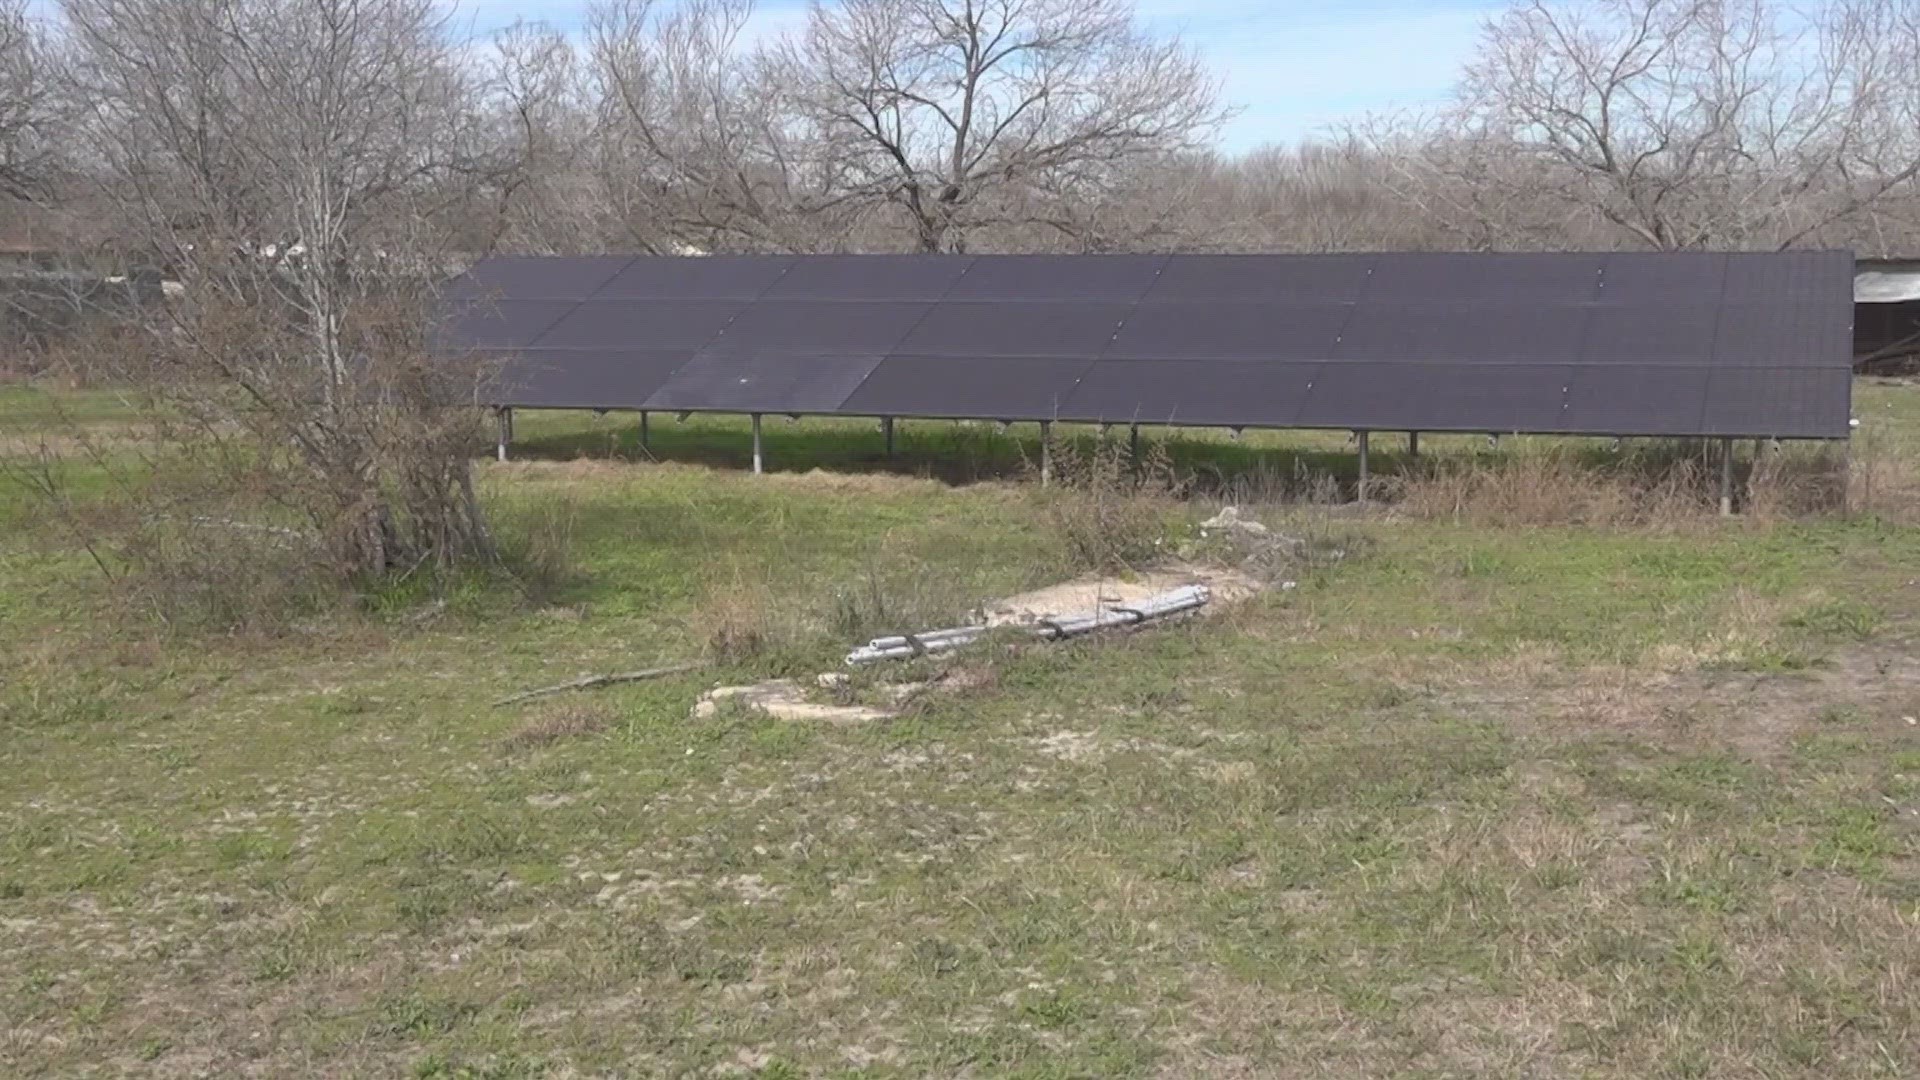 Isabel Hernandez has been paying hundreds of dollars for solar panels that were never connected to her home. Then she called KENS 5, and things changed.